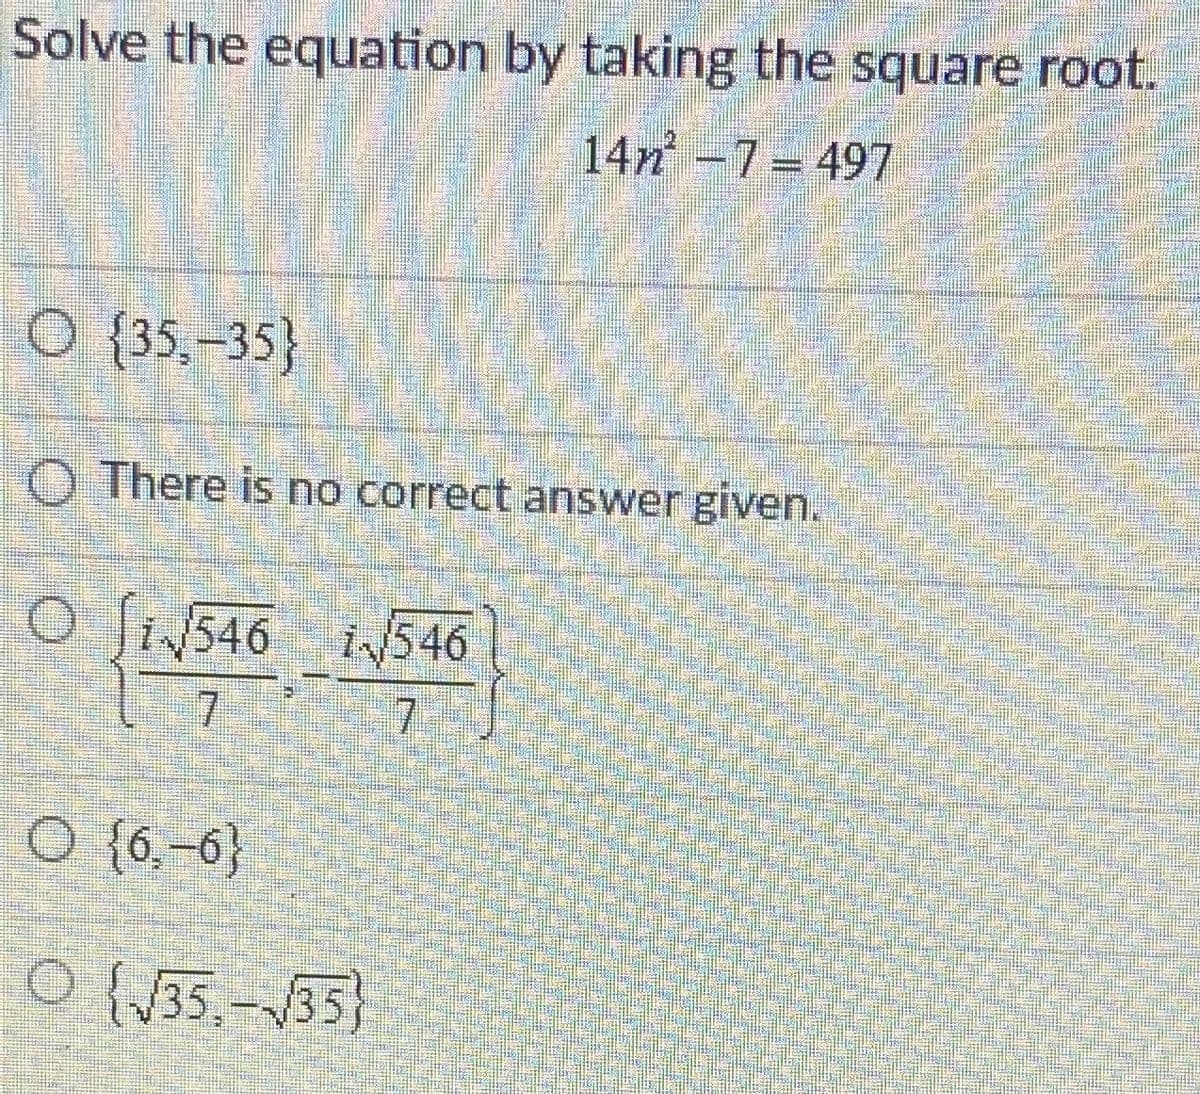 Solve the equation by taking the square root.
14n-7= 497
O {35,-35}
O There is no correct answer given.
O Si546 i546
7.
7.
O {6,-6}
O {J35,-35}
